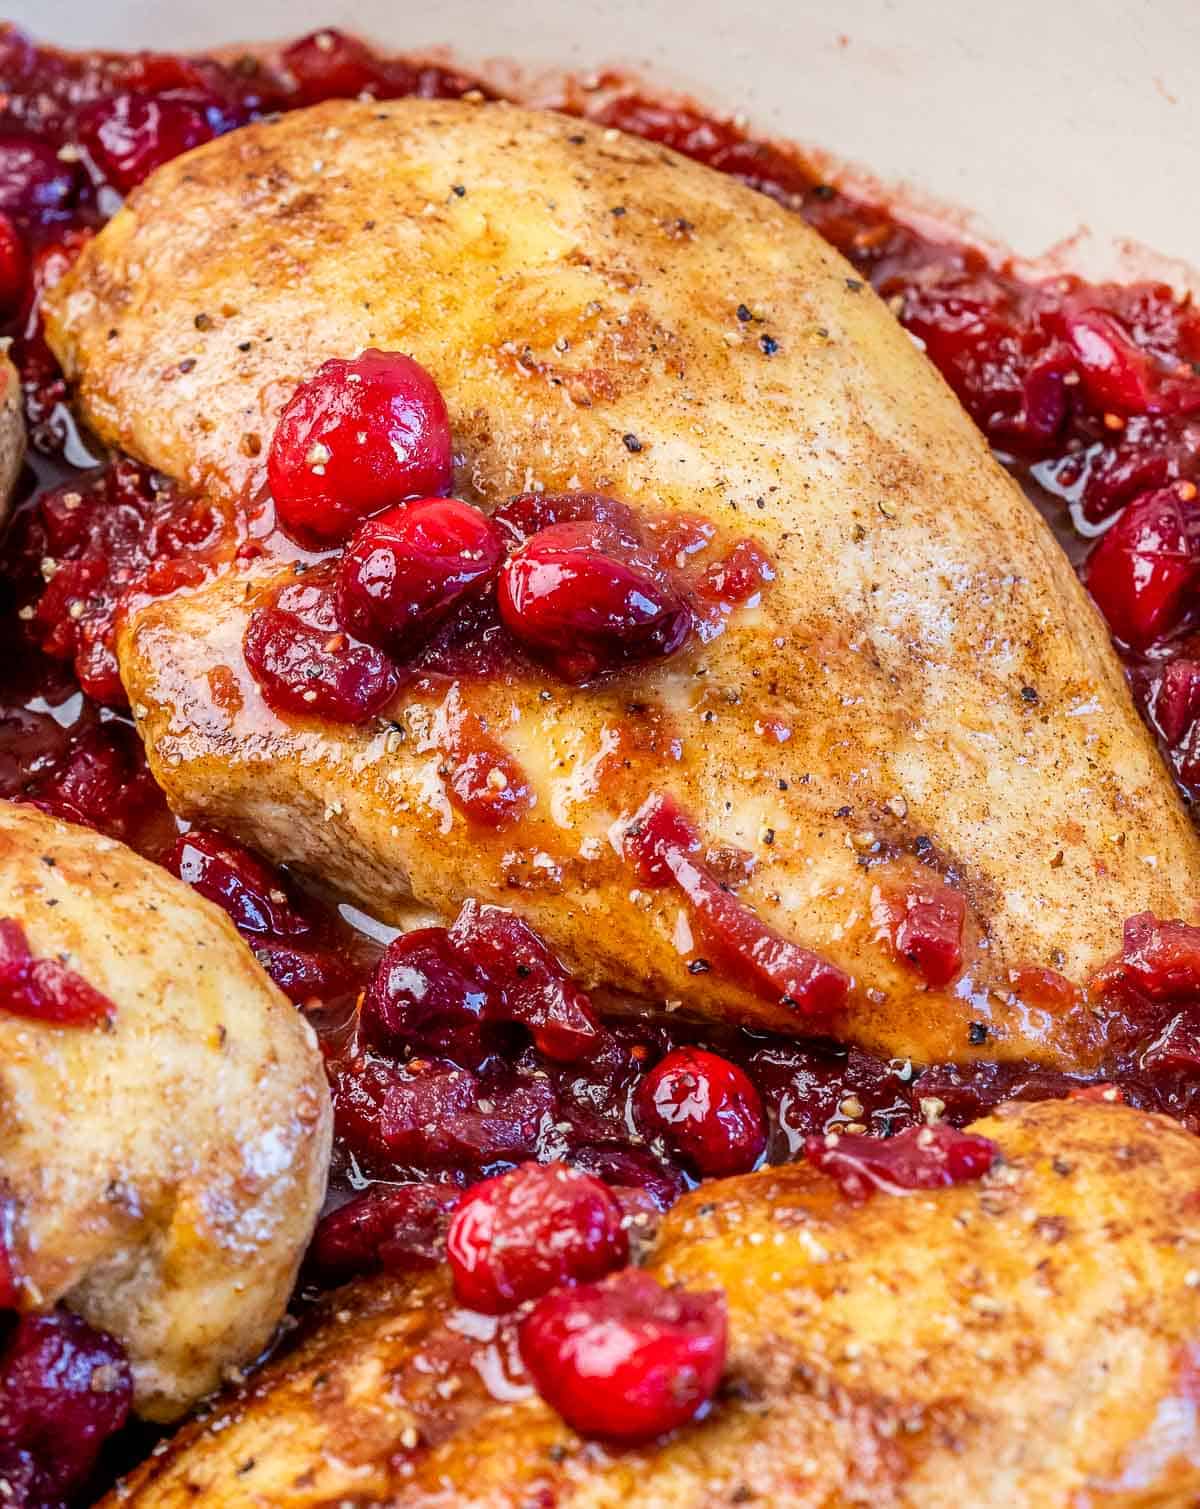 Chicken breast cooked in cranberry sauce.